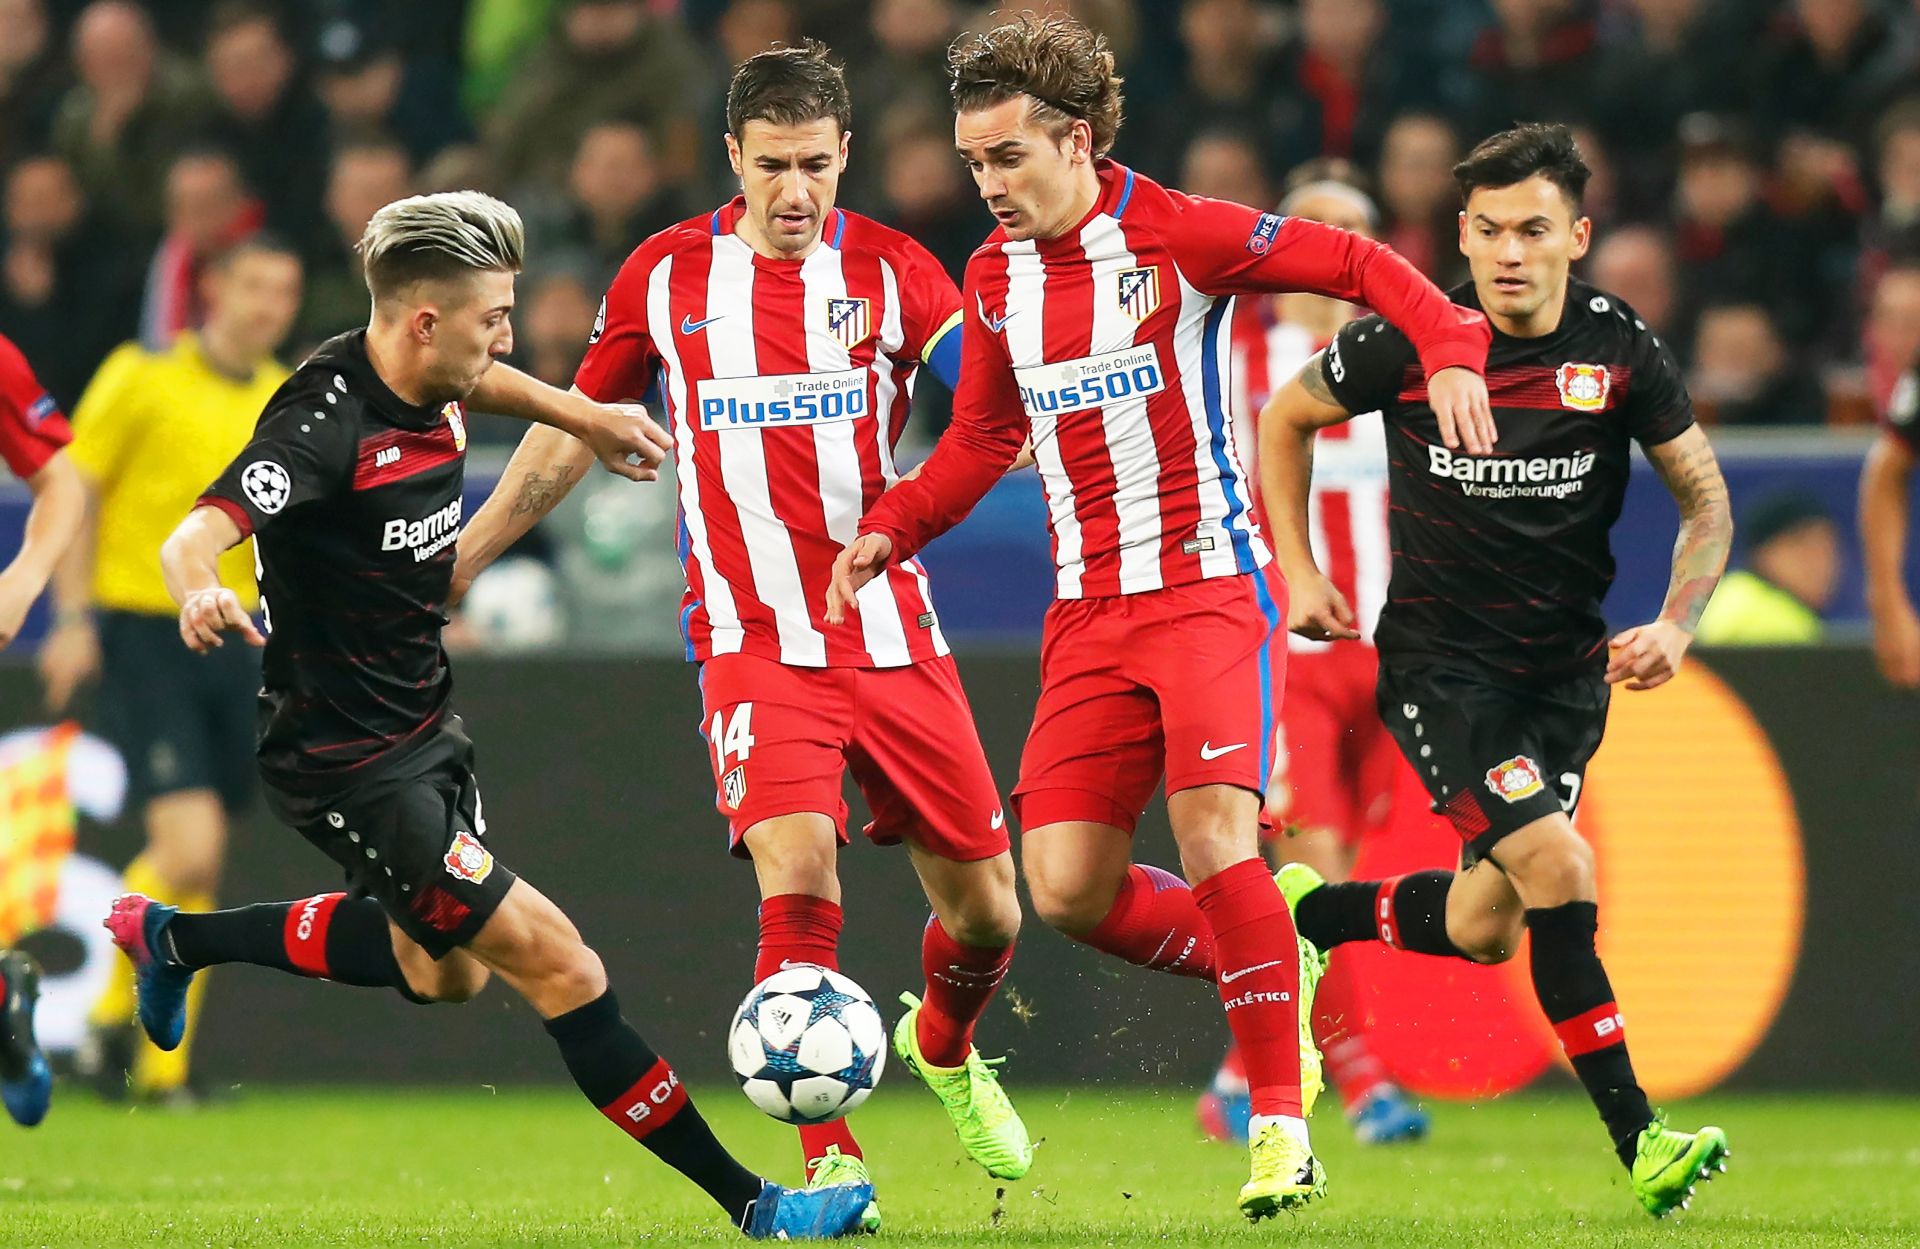 epa05807433 Atletico Madrid's Antoine Griezmann (2-R) in action against Leverkusen's Kevin Kampl (L) during the UEFA Champions League Round of 16, first leg soccer match between Bayer Leverkusen and Atletico Madrid in Leverkusen, Germany, 21 February 2017.  EPA/FRIEDEMANN VOGEL